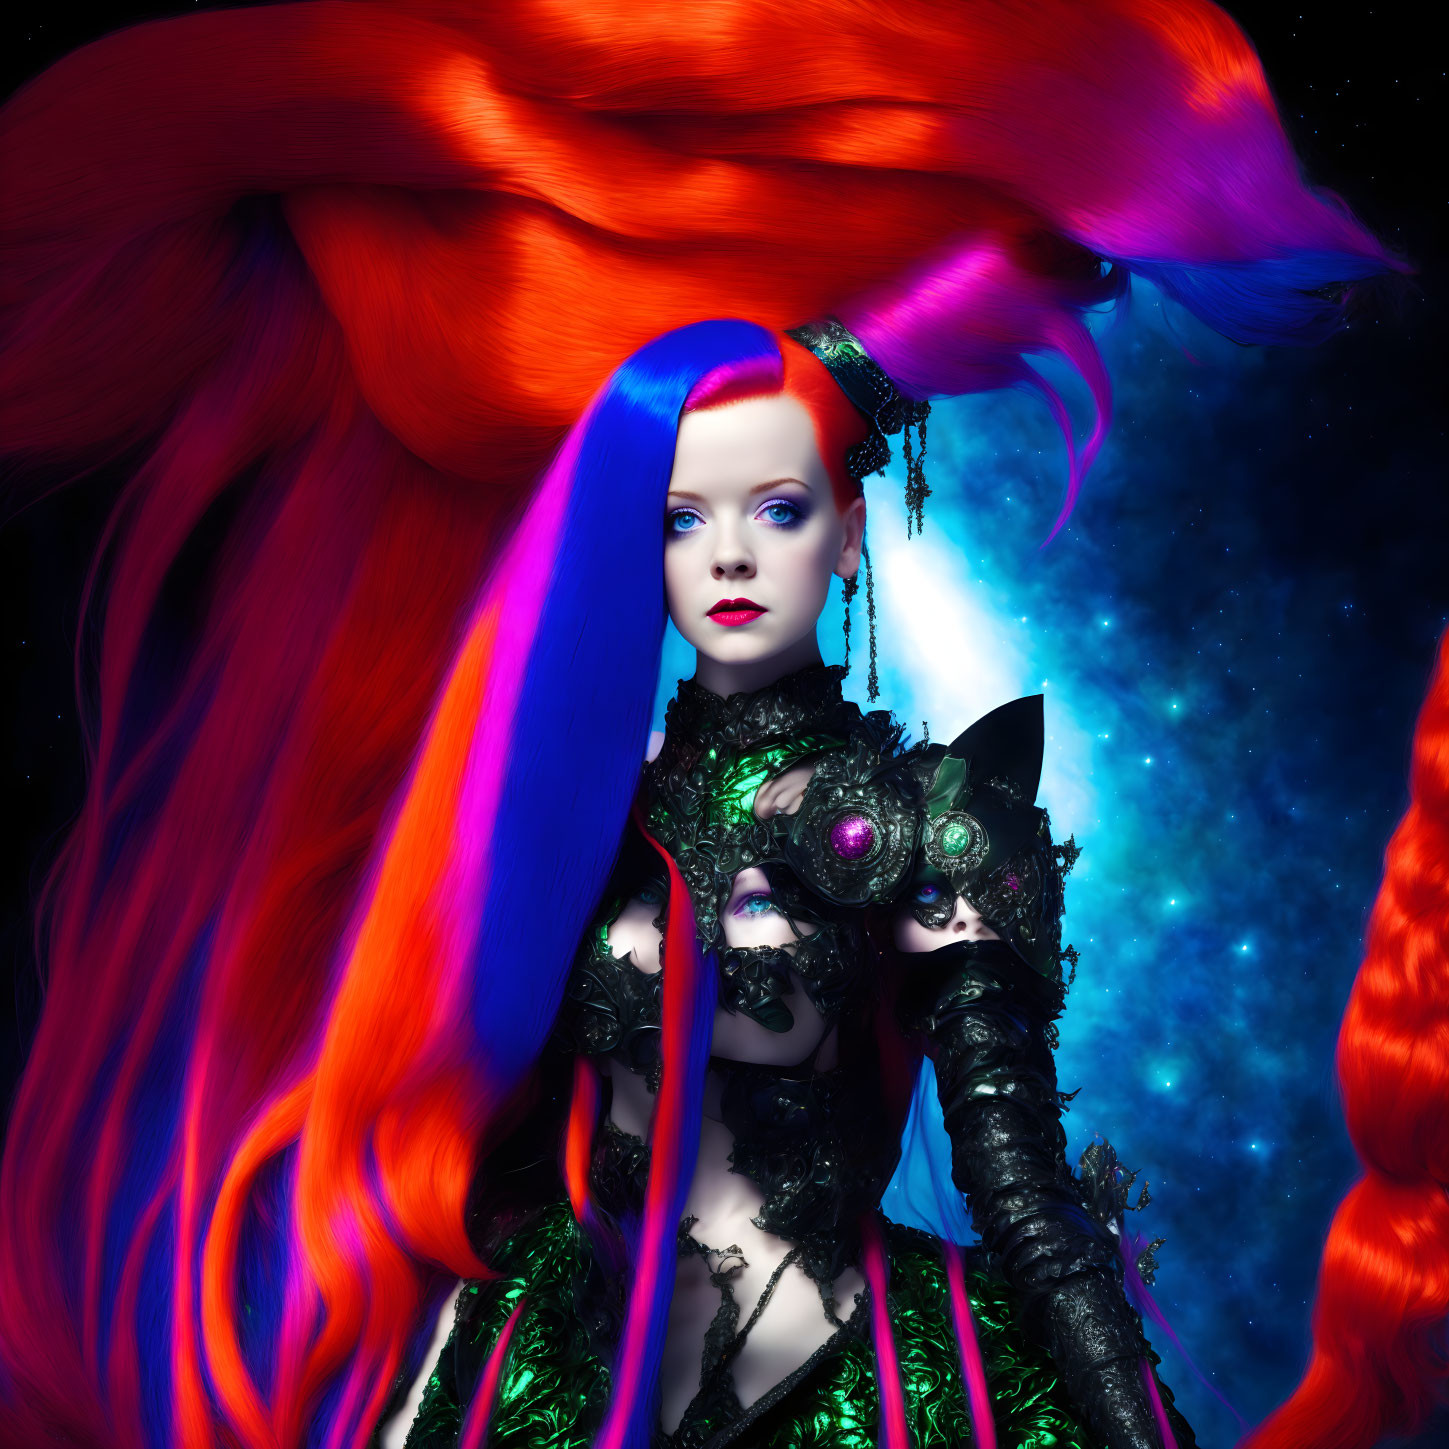 Fantasy figure with red hair, blue streak, and black armor in cosmic setting